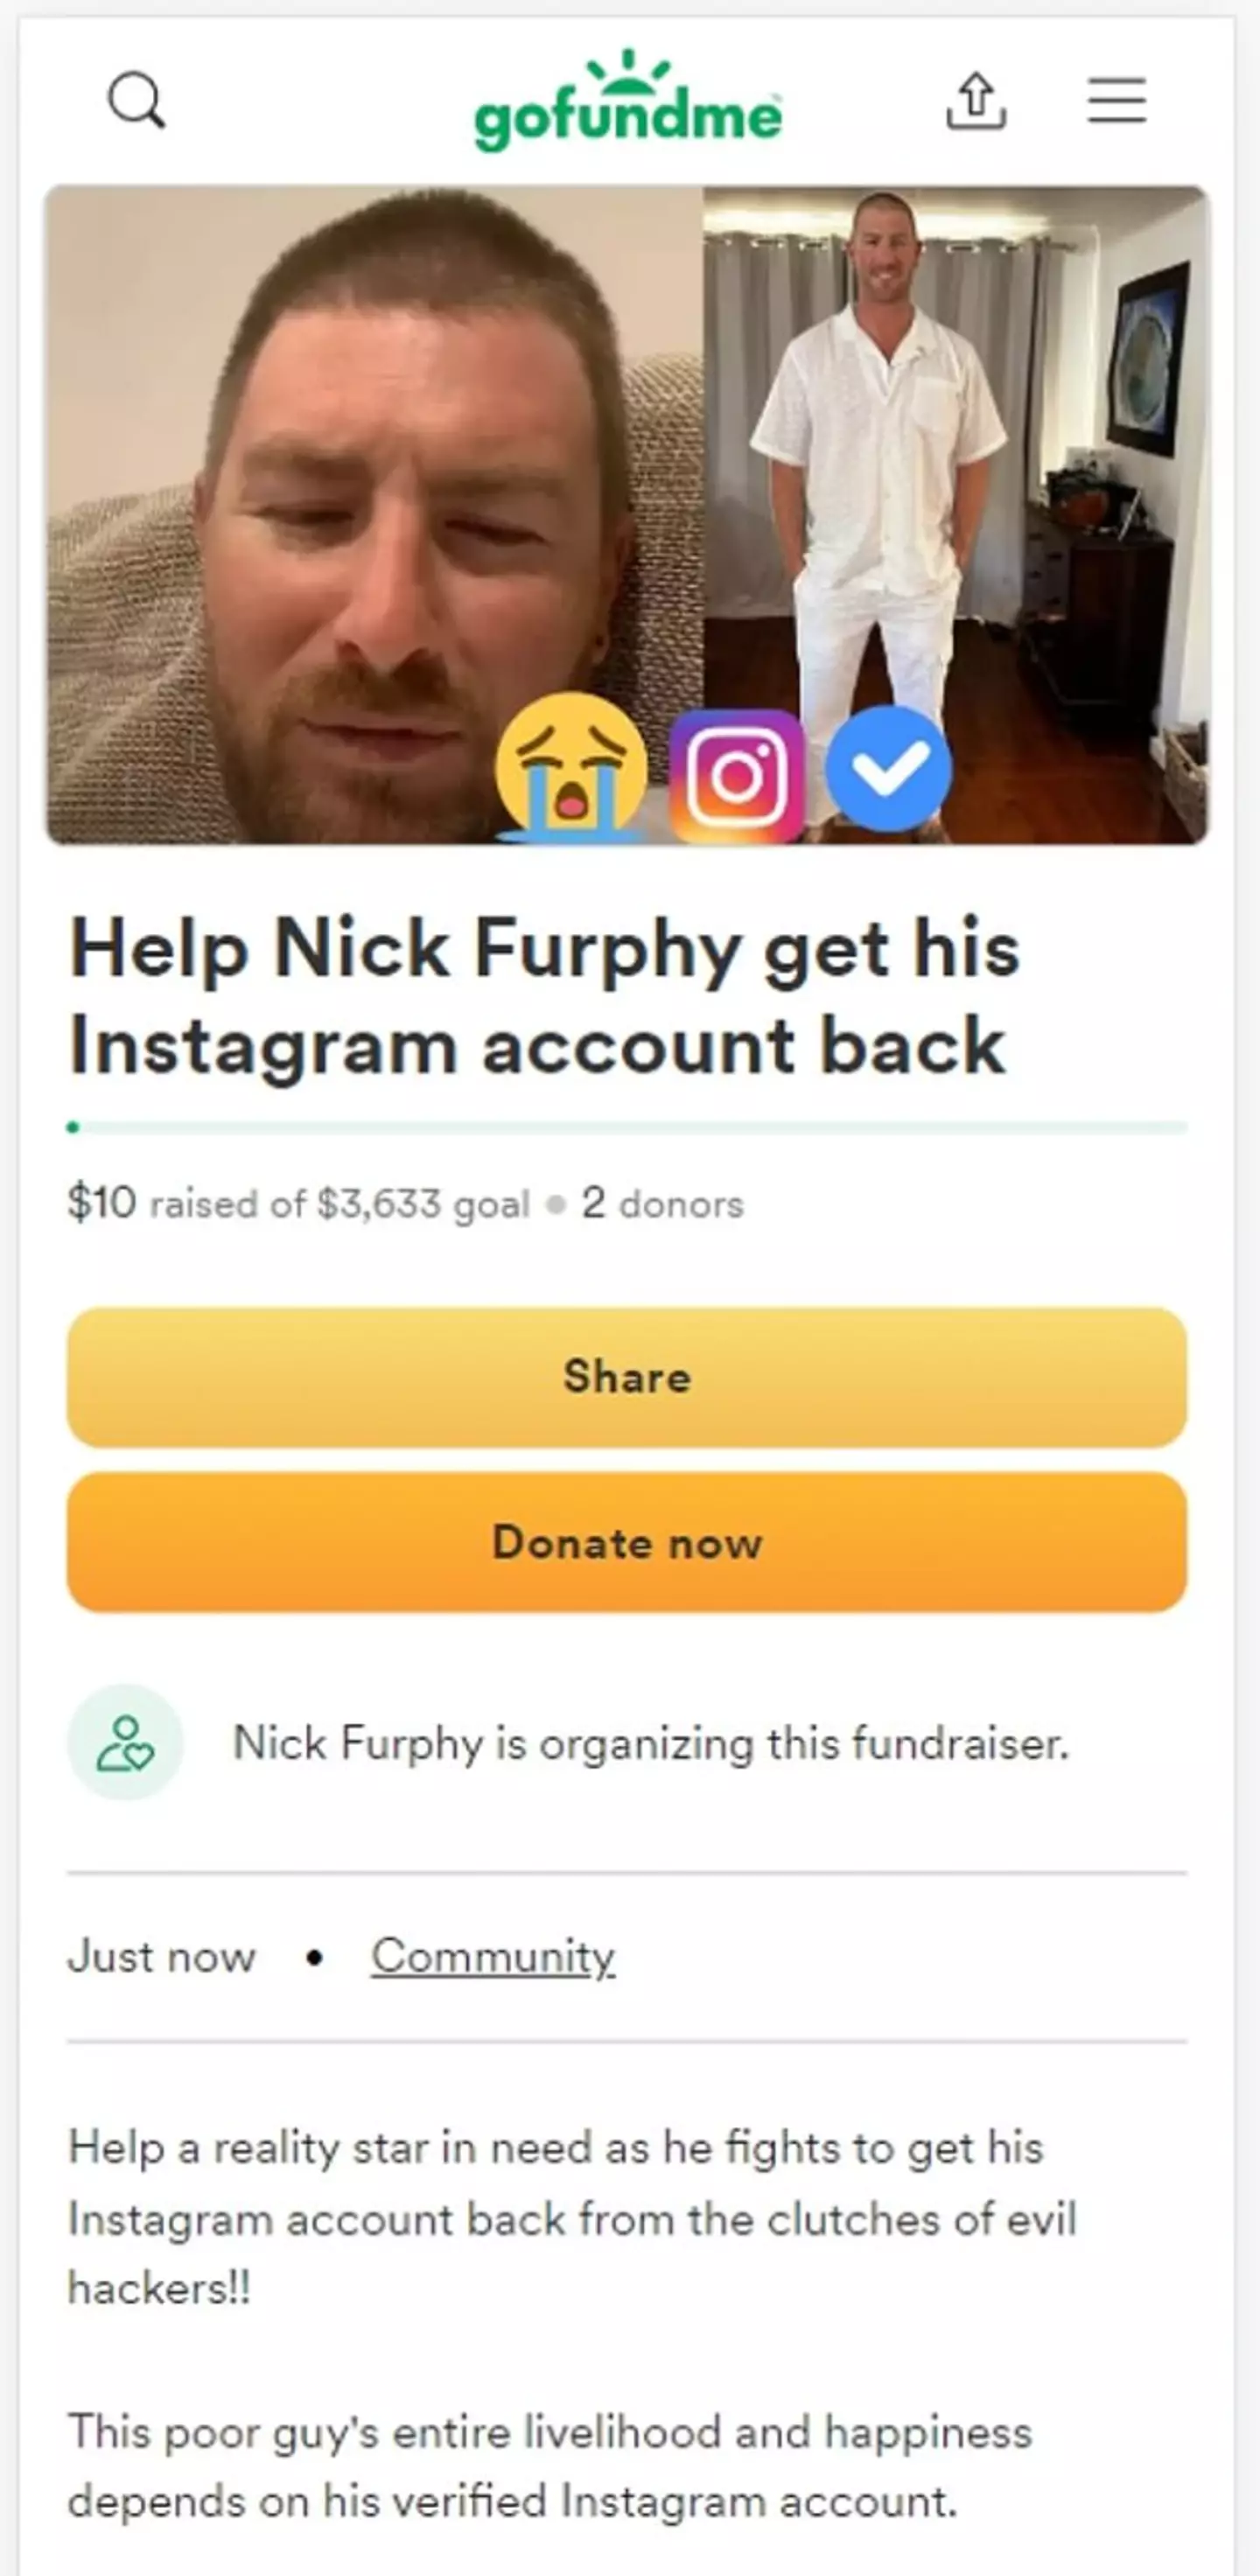 The fundraiser was set up to help him get his Instagram account back.